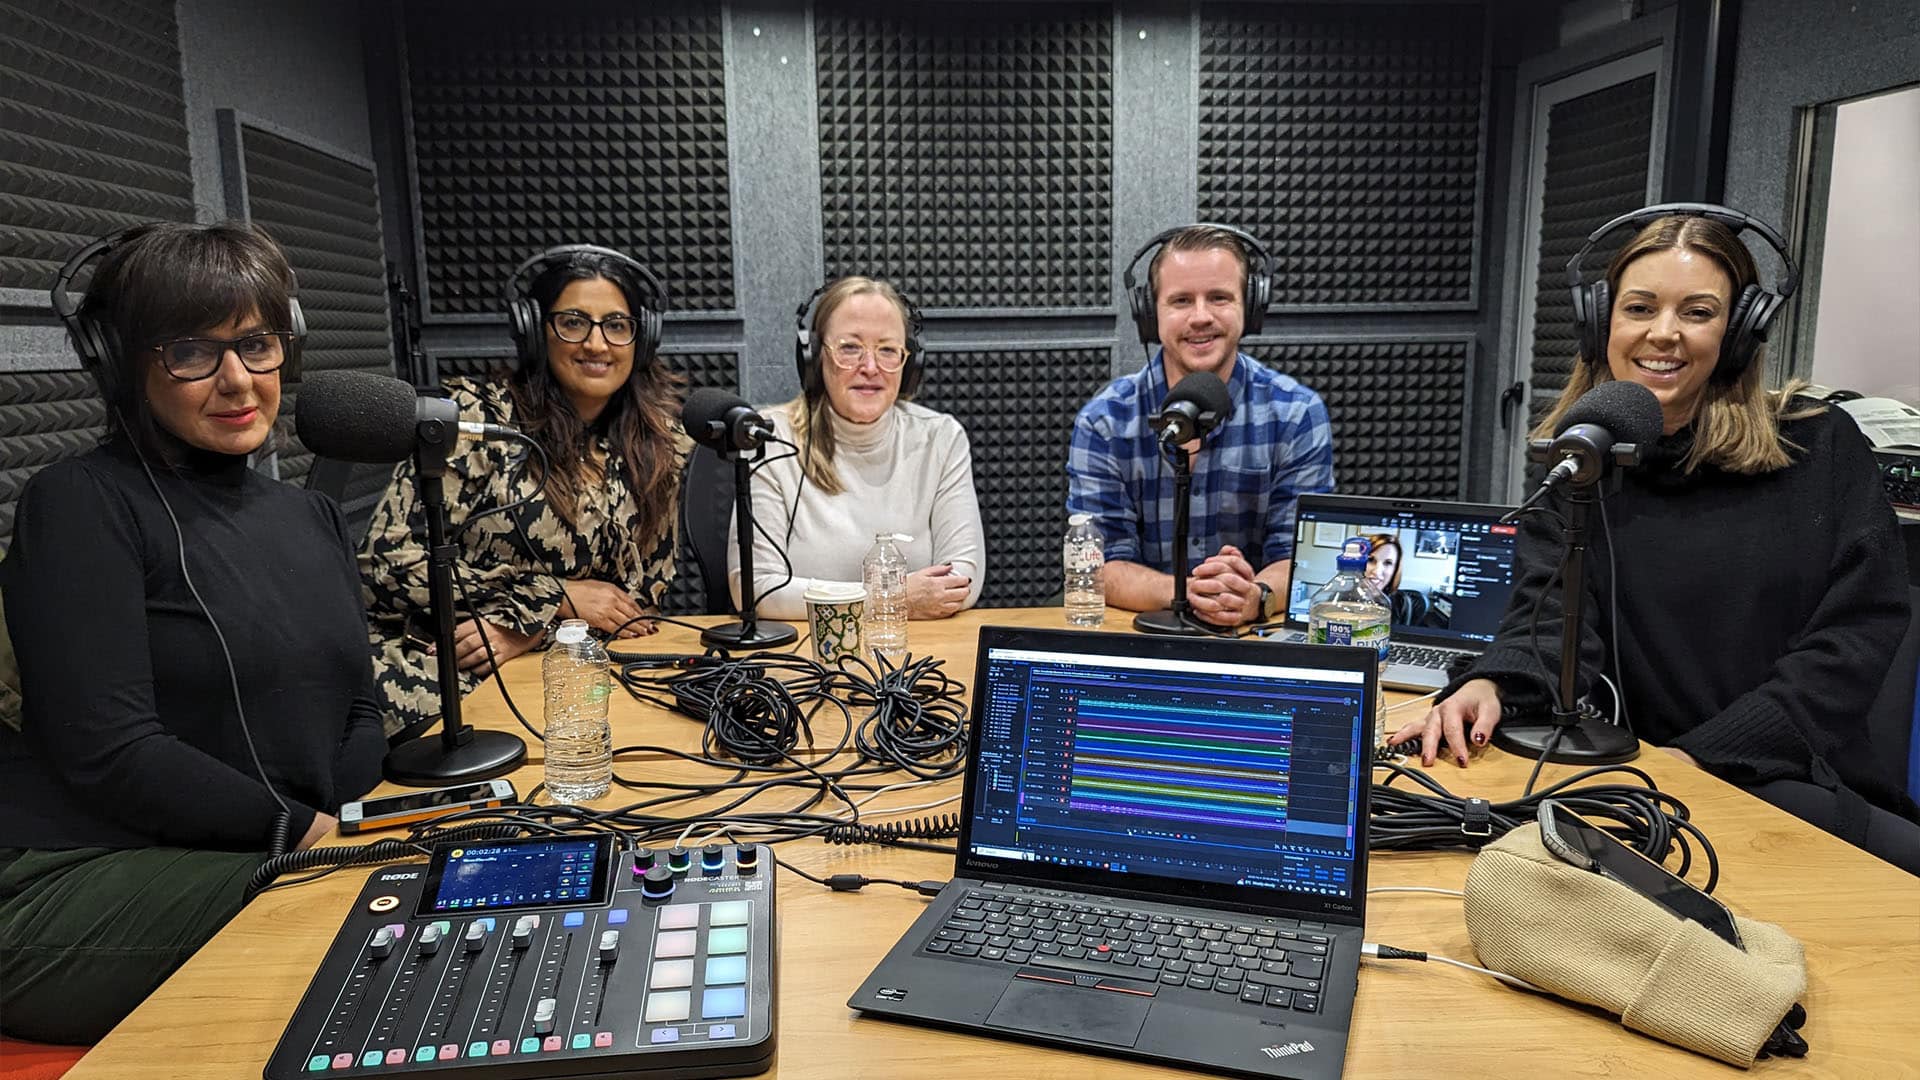 Innobella Media Partners with Liverpool John Moores University for “Mindful Merseyside” Podcast